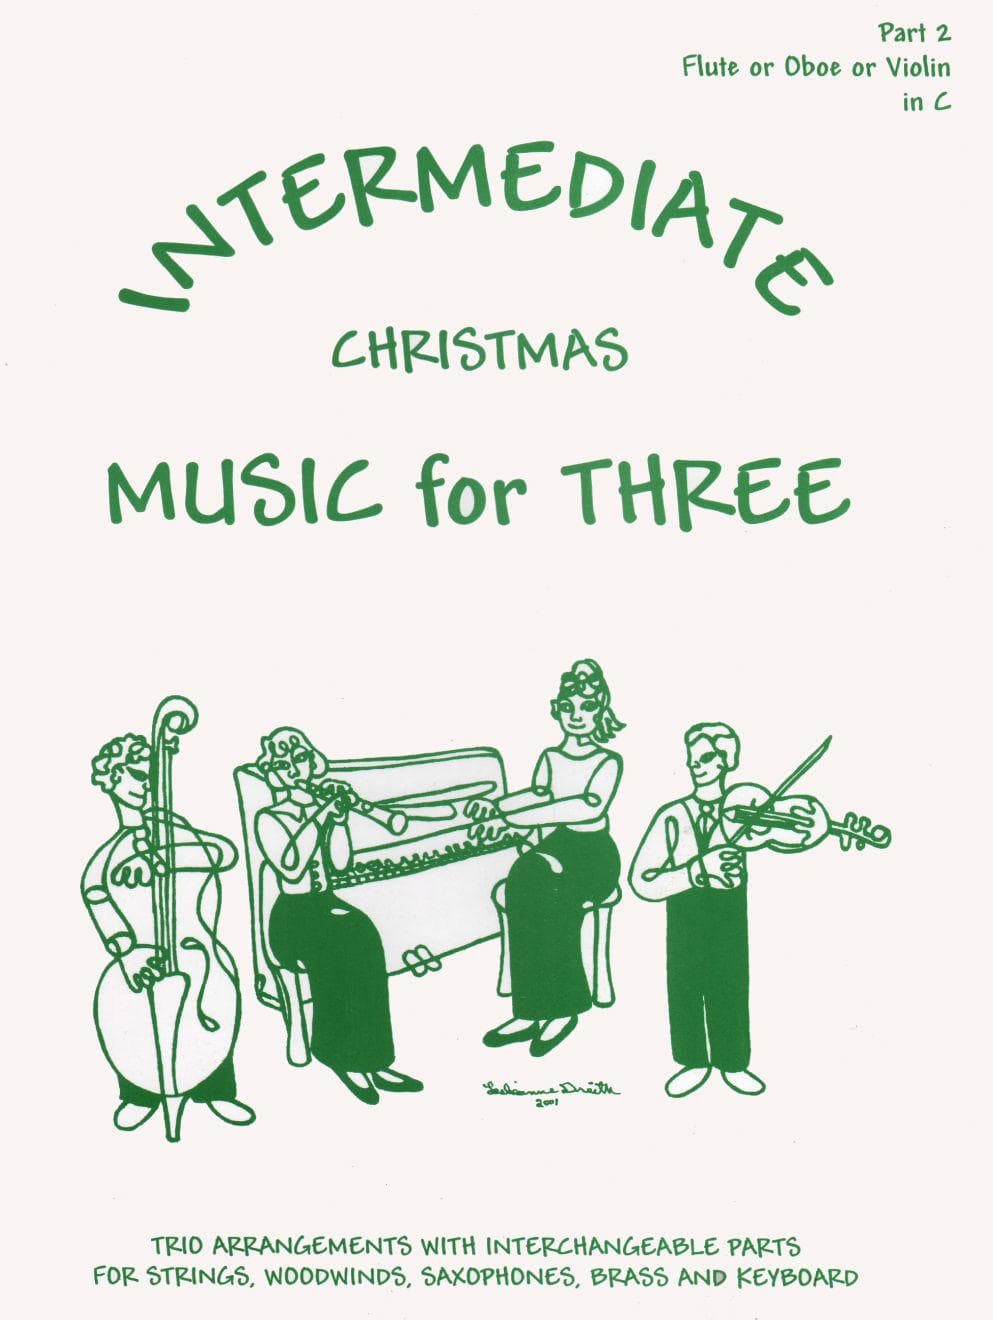 Music for Three, Christmas Part 2 for Violin, Oboe, or Flute Published by Last Resort Music